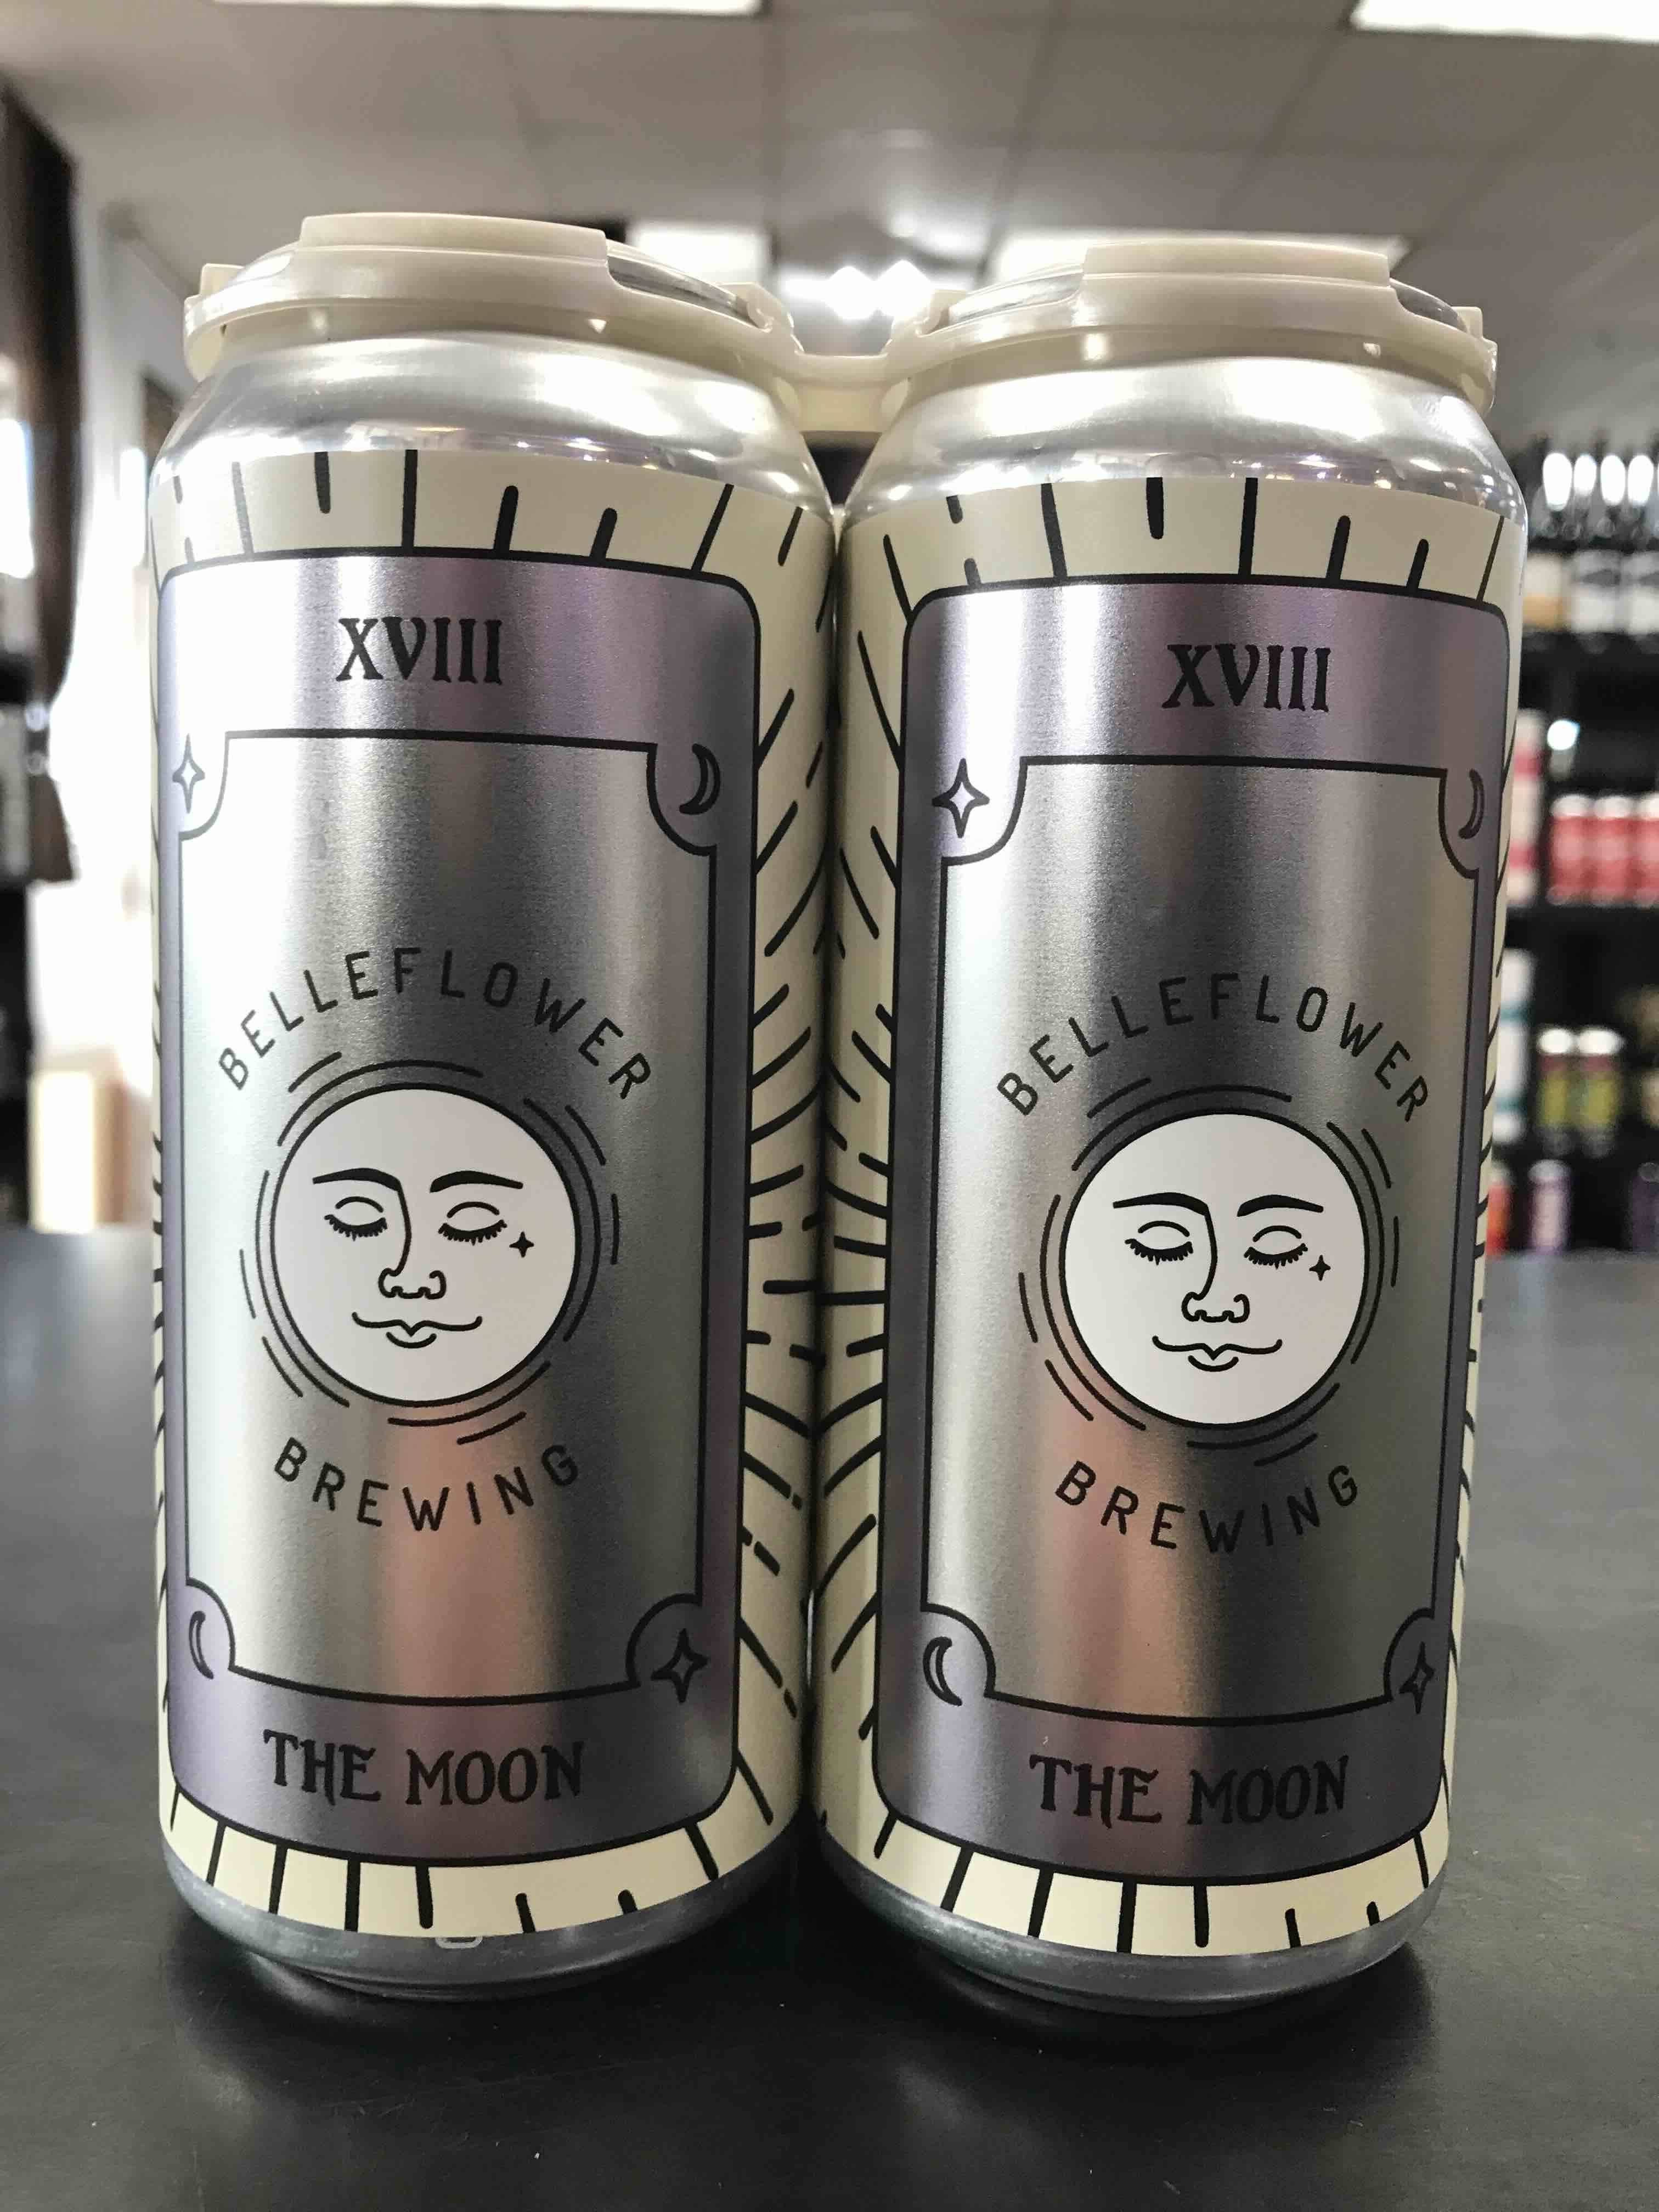 Belleflower Brewing - The Sun and The Moon (4 Pack 16oz cans)